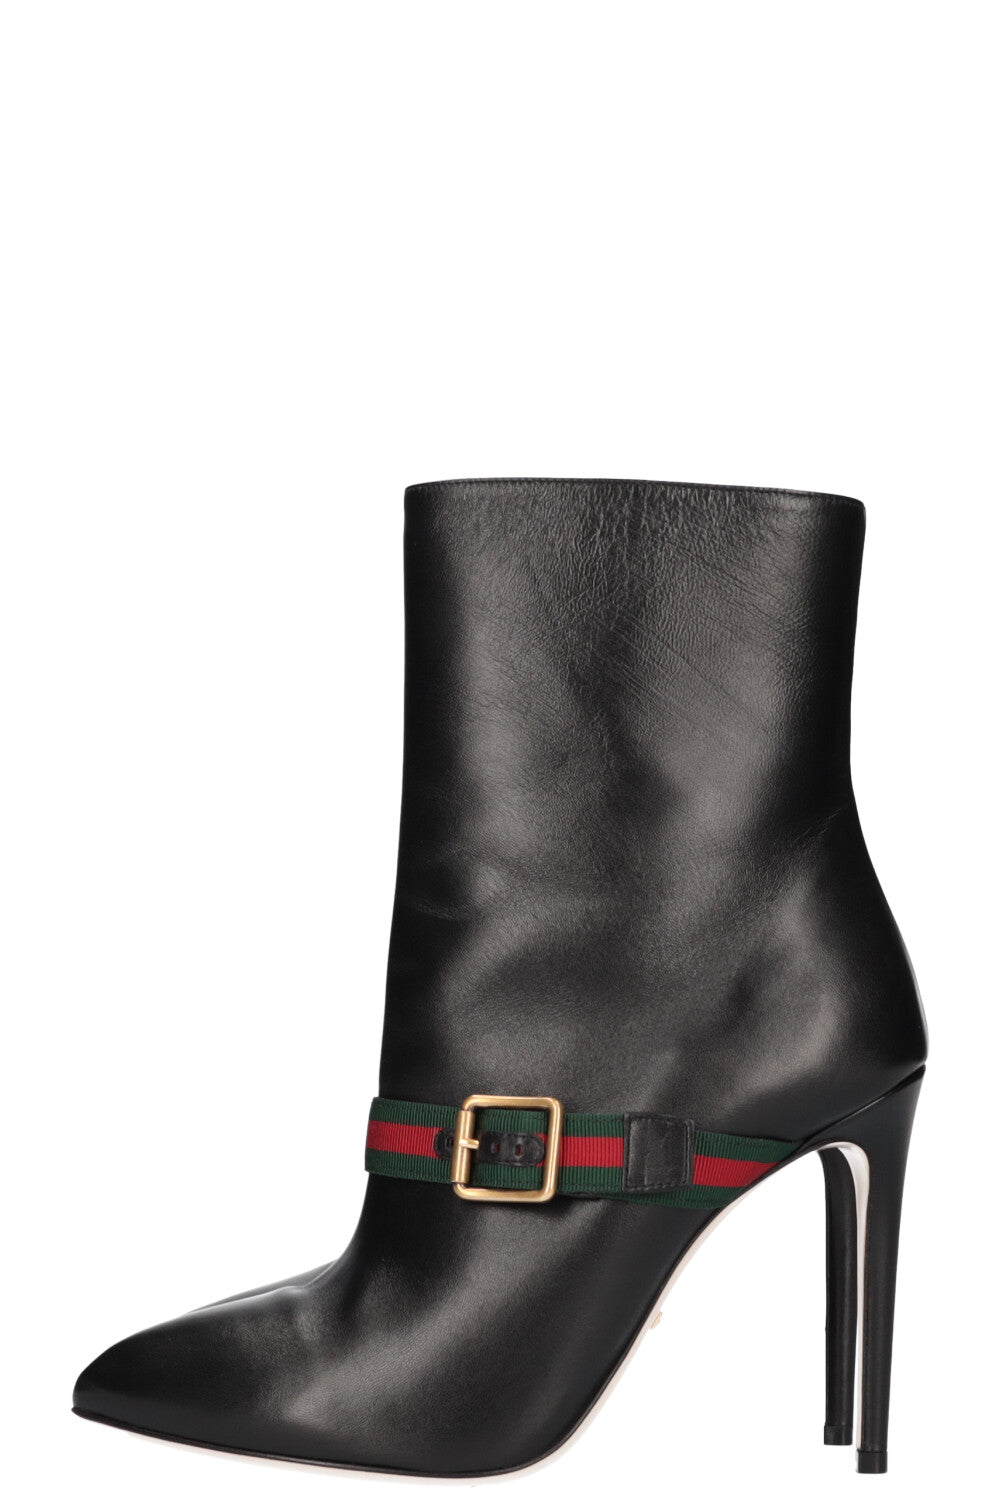 Gucci Buckle Ankle Boots Black